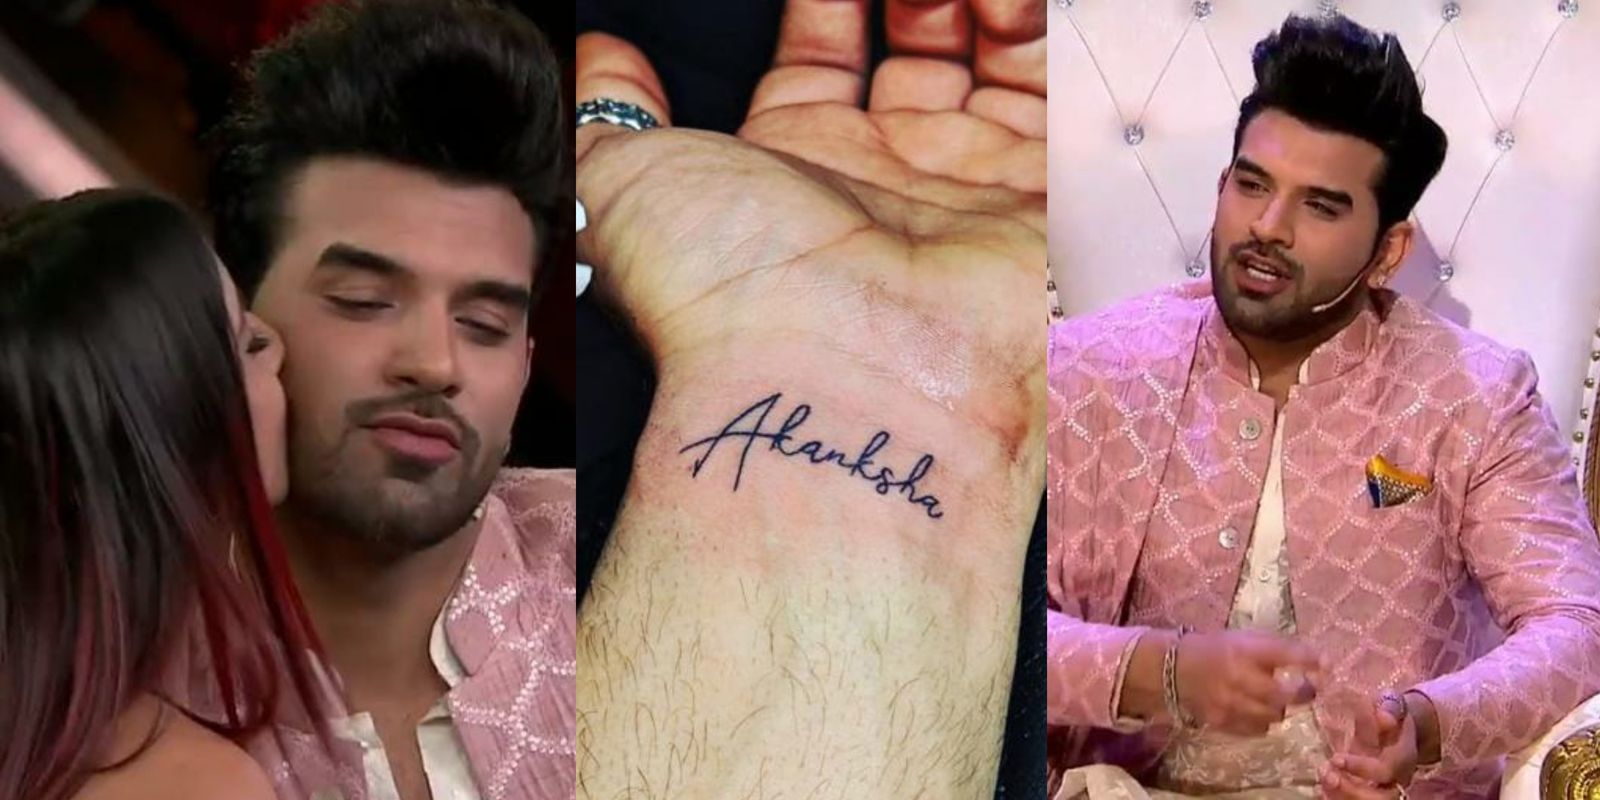 Mujhse Shaadi Karoge Preview: Paras Begins His Quest; Says He Will Replace Akanksha’s Tattoo On His Wrist With ‘Who’s Next?’